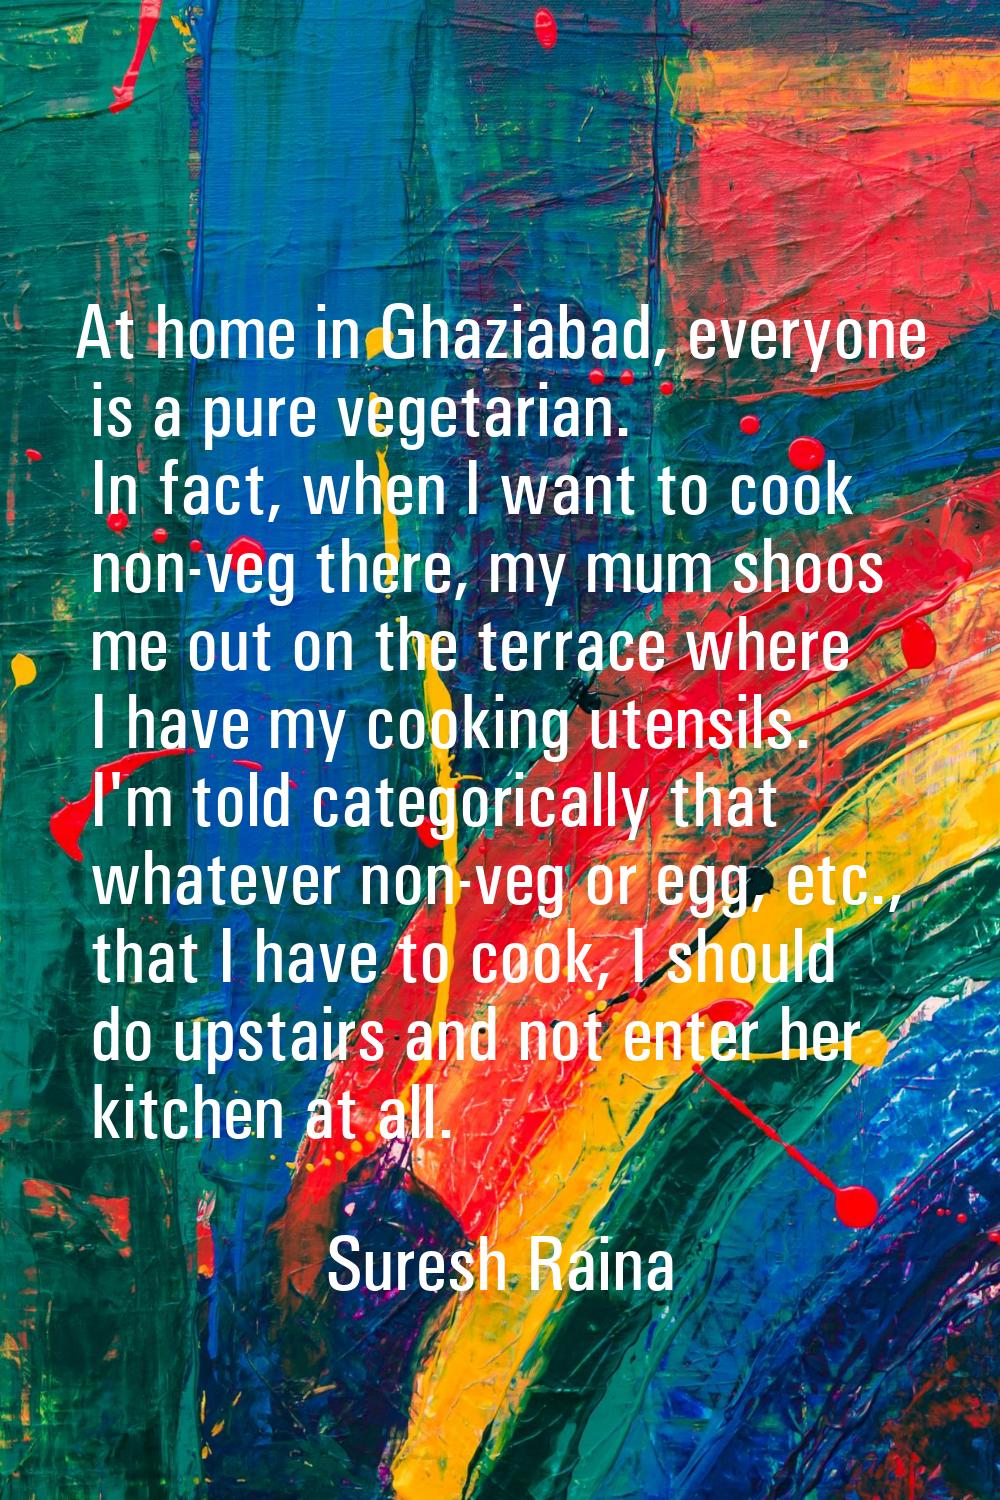 At home in Ghaziabad, everyone is a pure vegetarian. In fact, when I want to cook non-veg there, my